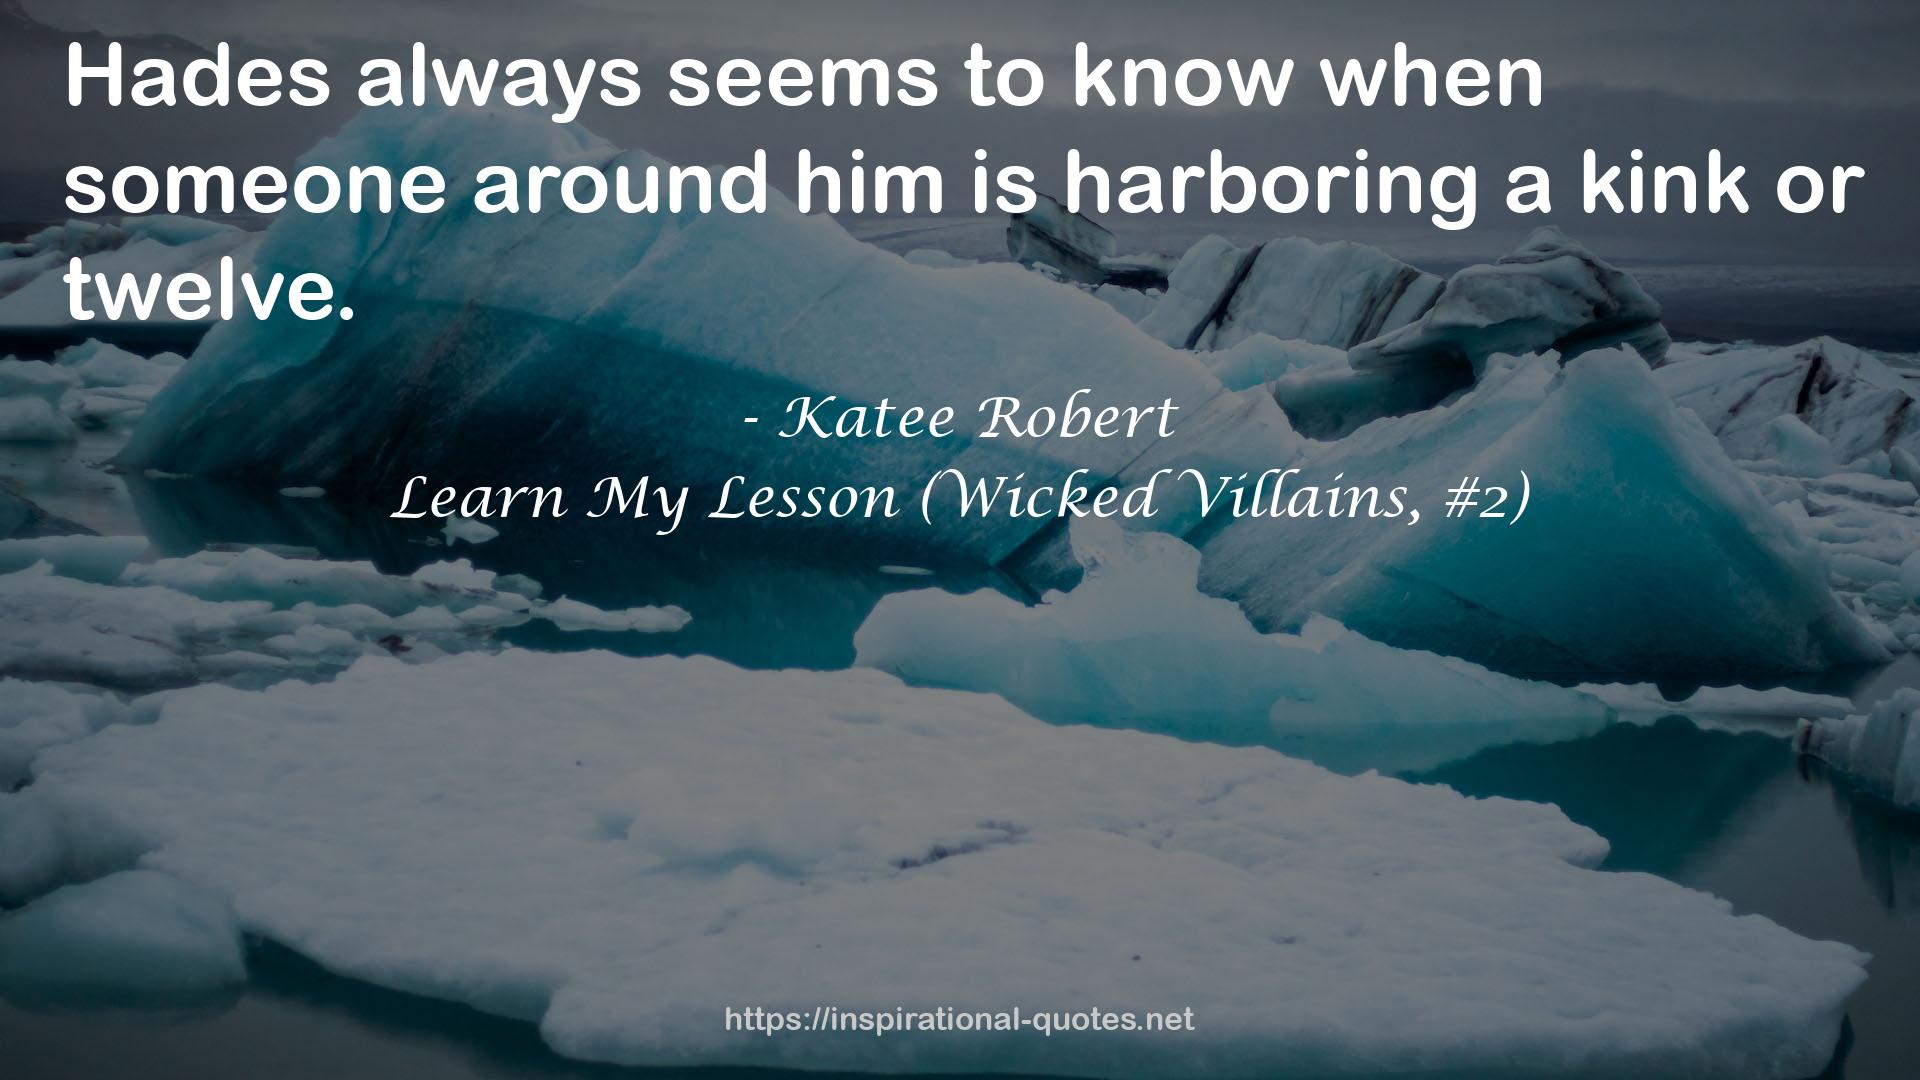 Learn My Lesson (Wicked Villains, #2) QUOTES